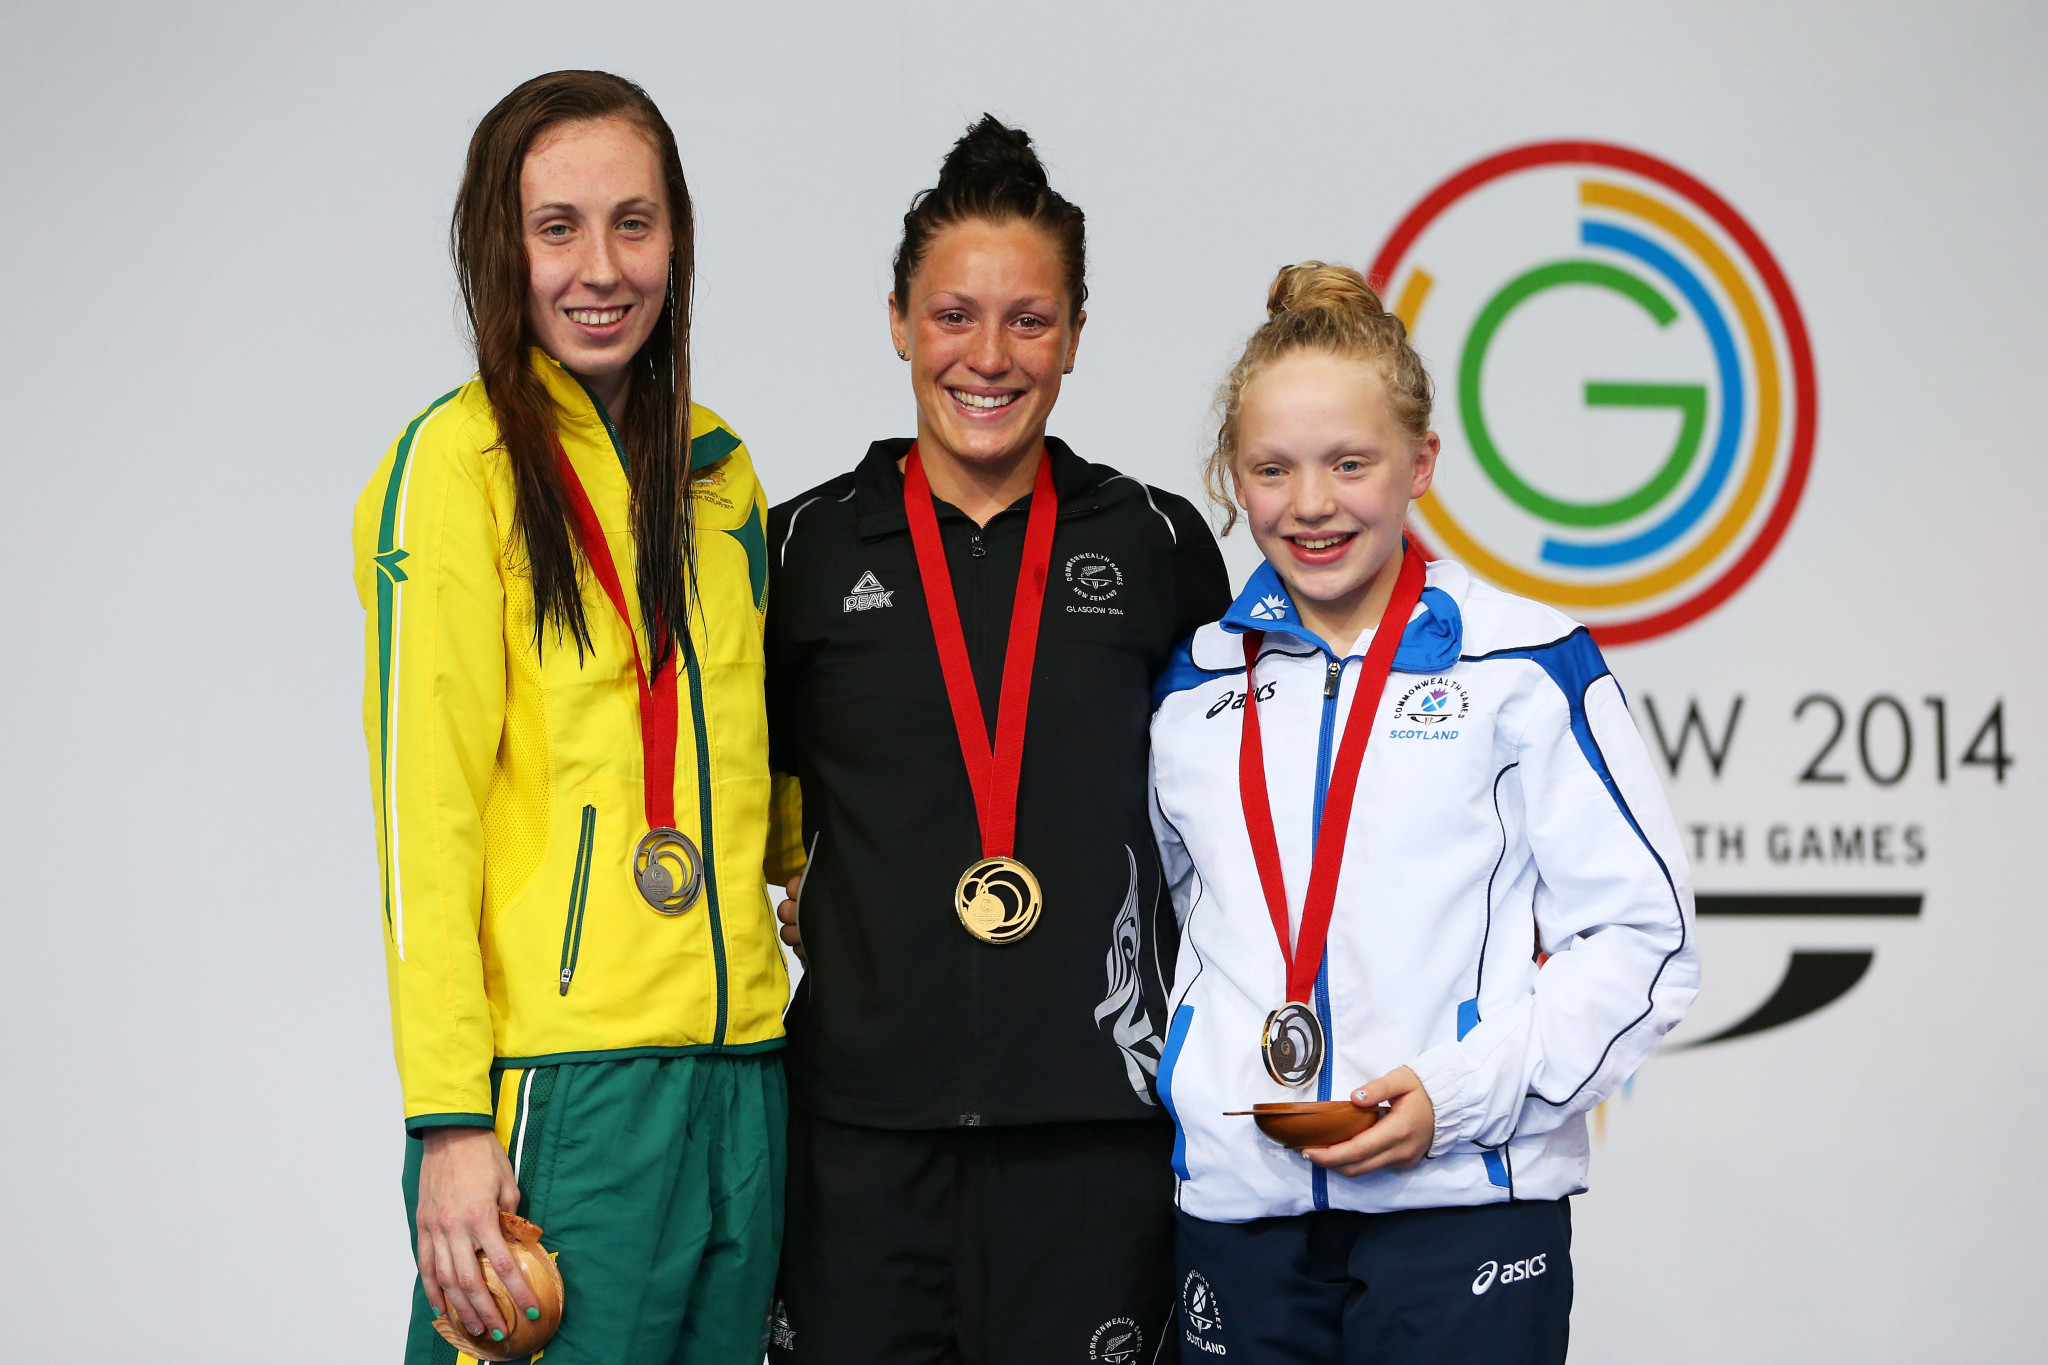 Gold medallist Sophie Pascoe of New Zealand poses with silver medallist Madeleine Scott of Australia and bronze medallist Erraid Davies of Scotland during the medal ceremony for the Women's 100m Breaststroke SB9 Final at Tollcross International Swimming Centre ©Getty Images